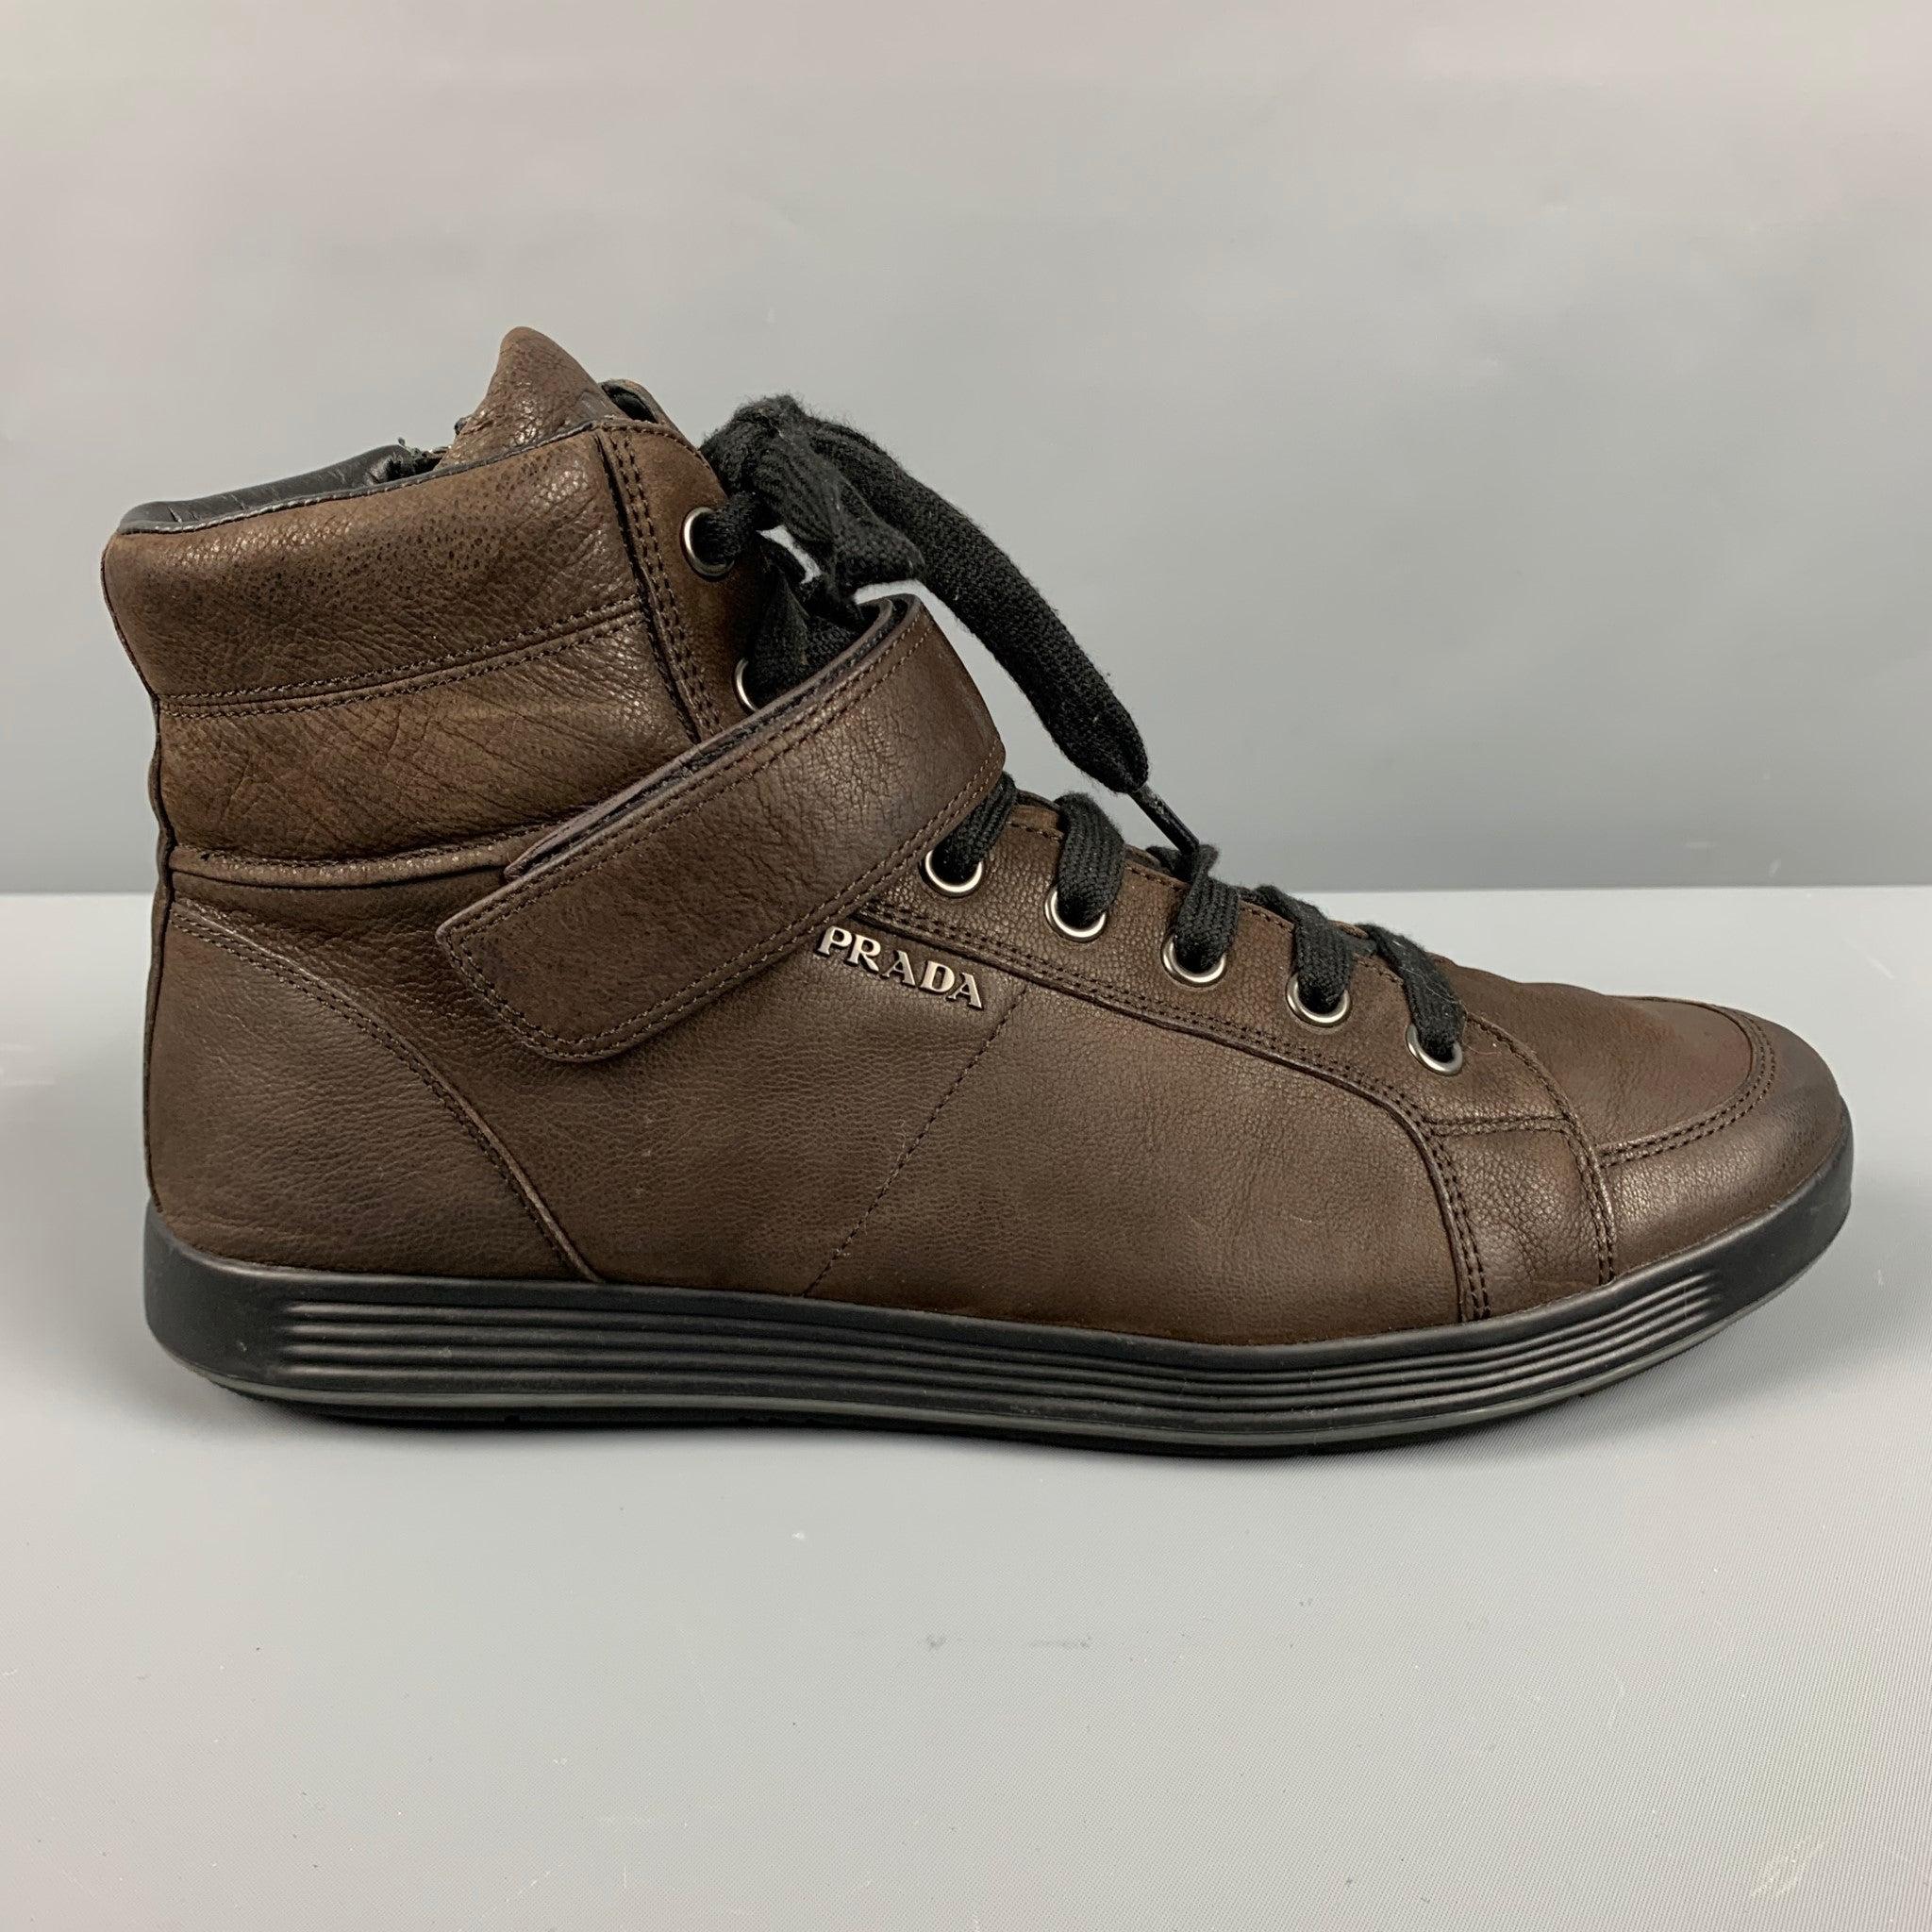 PRADA sneakers
in a brown fabric featuring a high top style, silver tone hardware, and side zipper closure.Very Good Pre-Owned Condition. 

Marked:   4T 2787 10Outsole:12 inches  x 4.25 inches 
  
  
Reference: 127963
Category: Sneakers
More